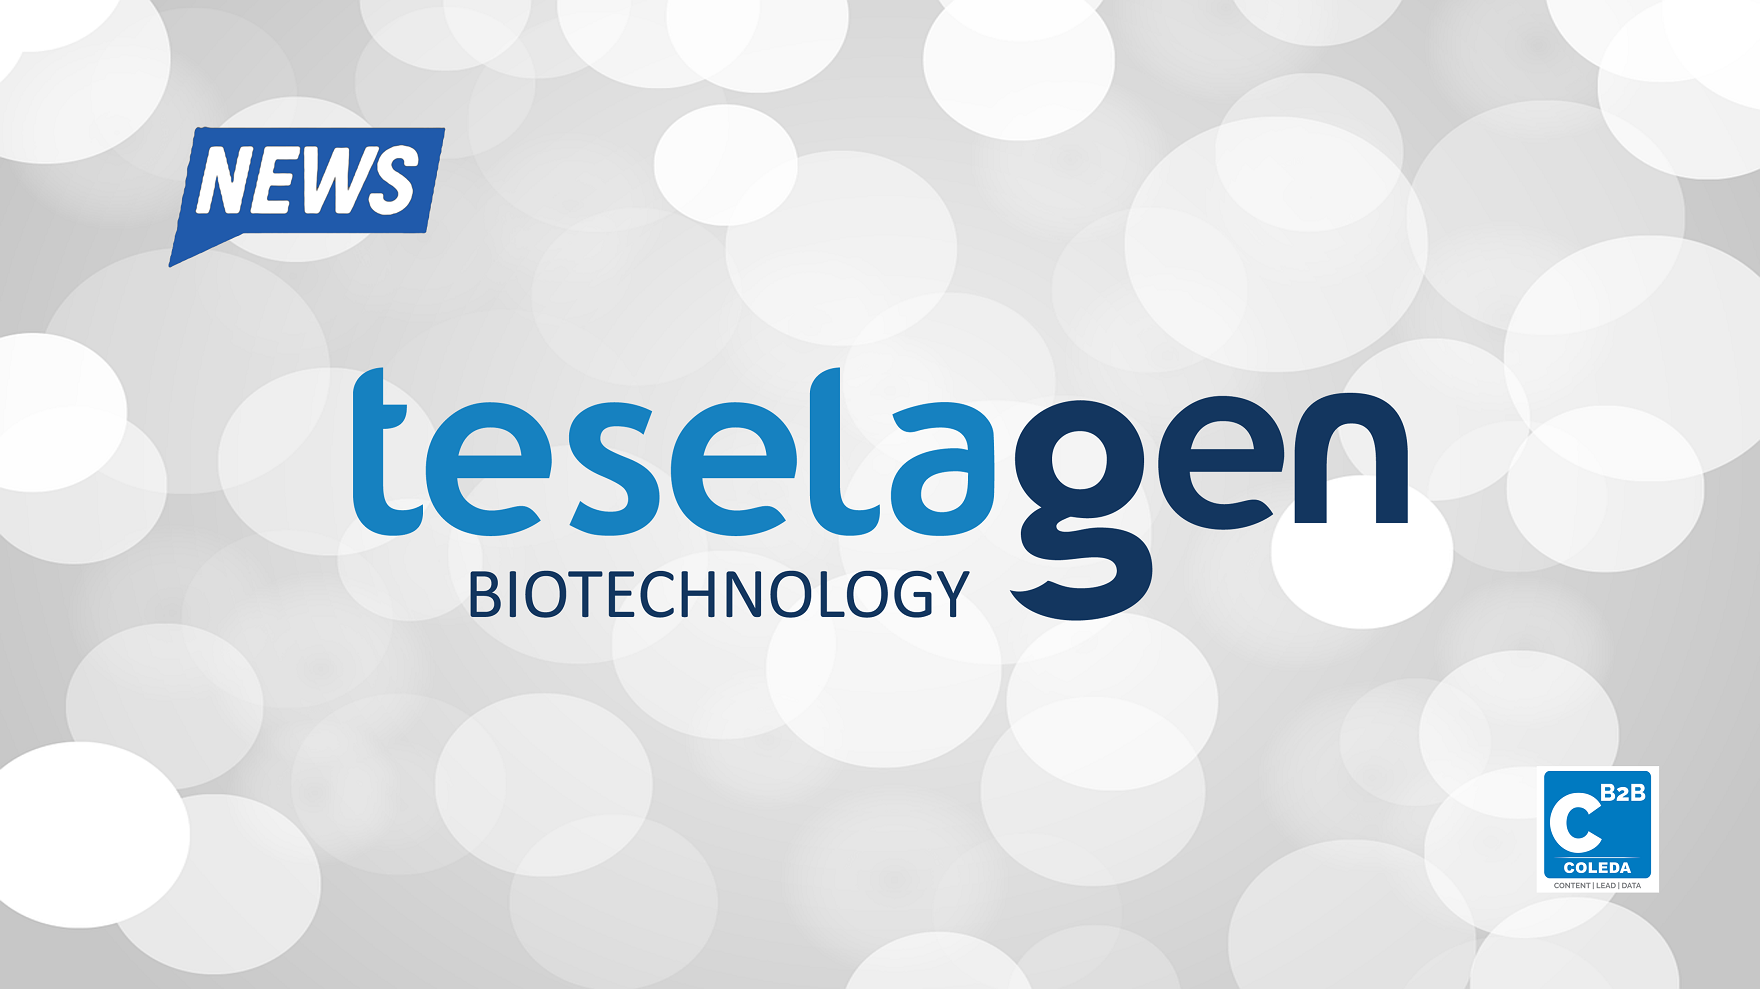 TeselaGen's Starter Version is Available to Aid BioTech Companies in Scaling Effectively